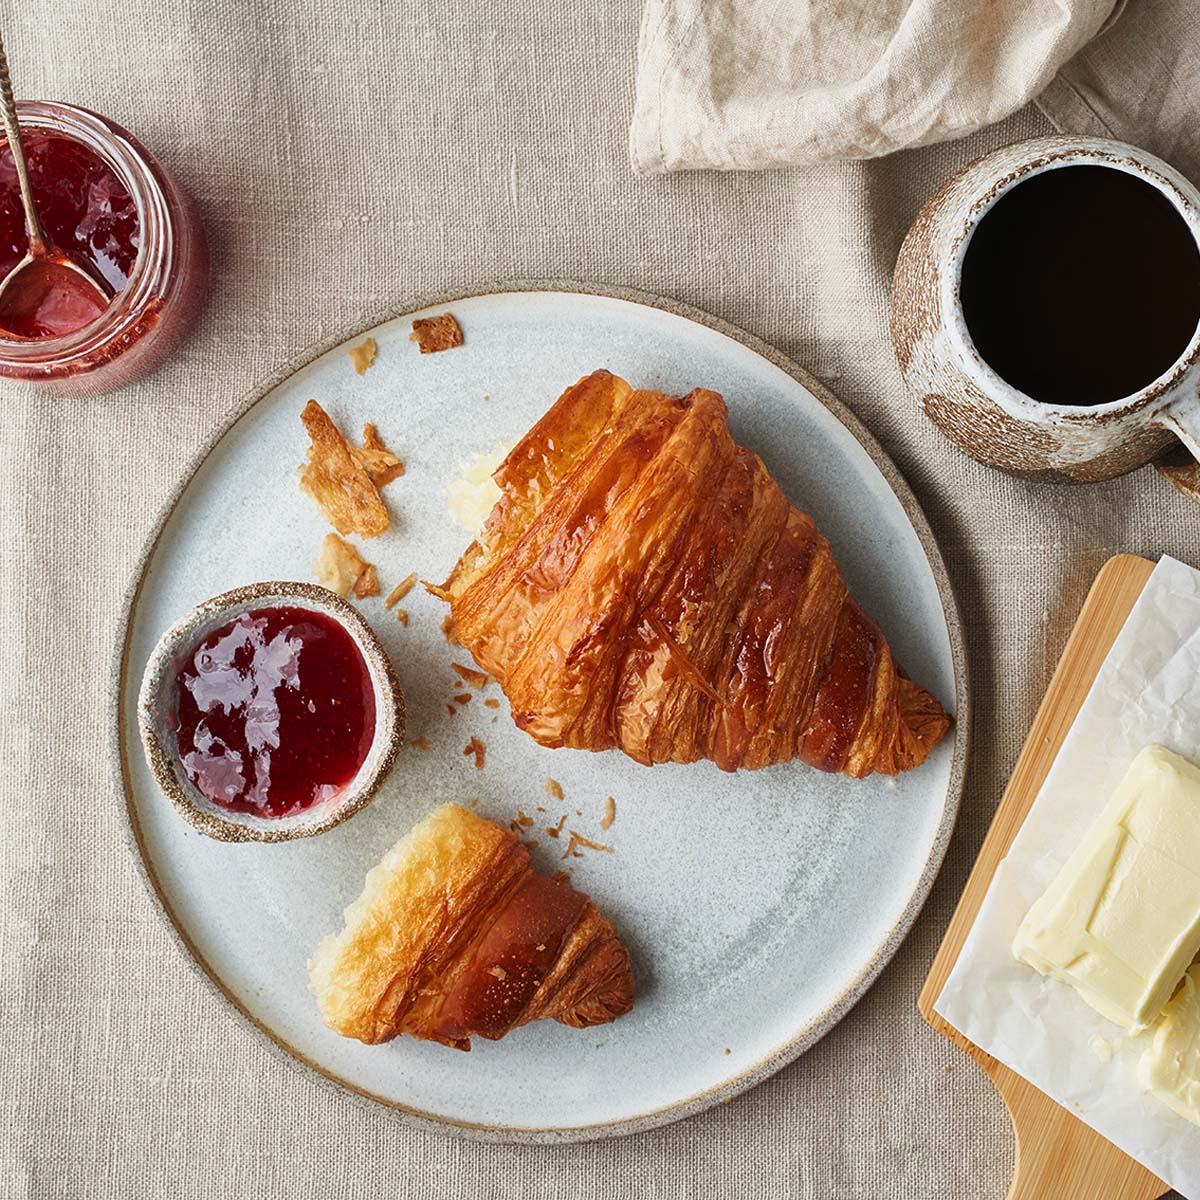 If you plan to consume croissants in a day, you can store your croissants at room temperature. Keep in mind that leaving croissants for more than two days will become soggy and stale.